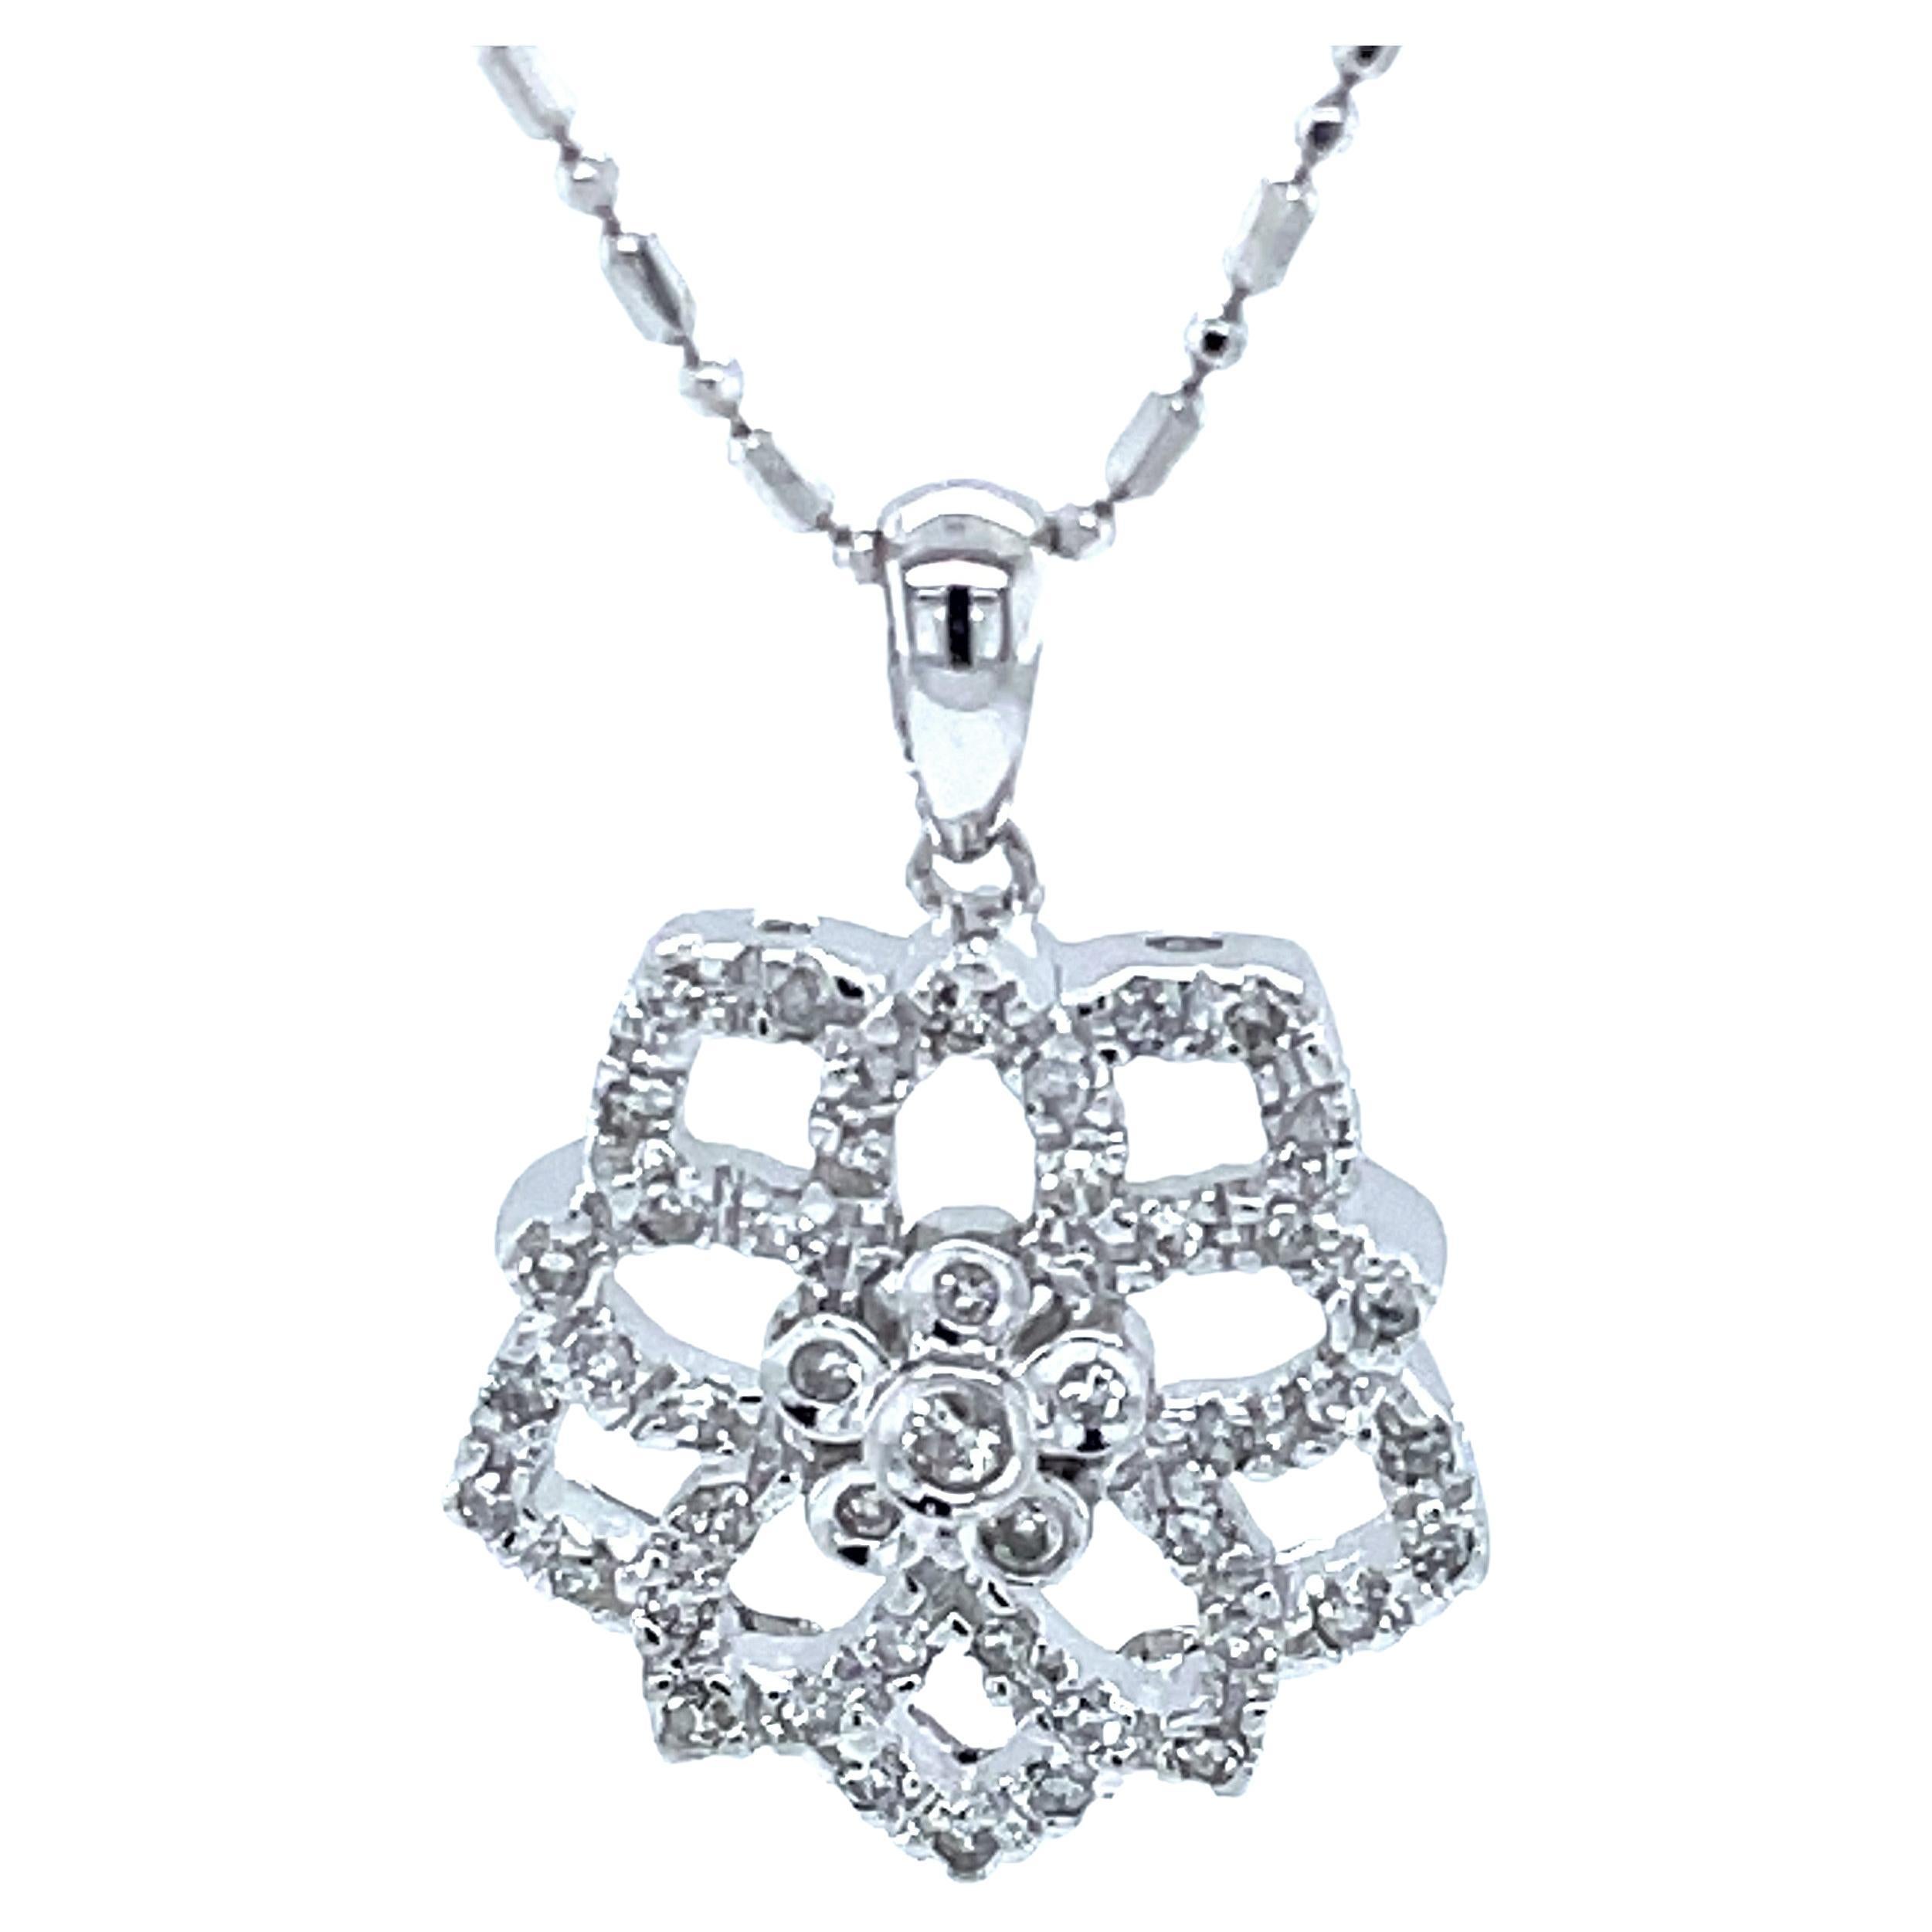 Floral Inspired 14 Karat White Gold Diamond Pendant Necklace For Sale